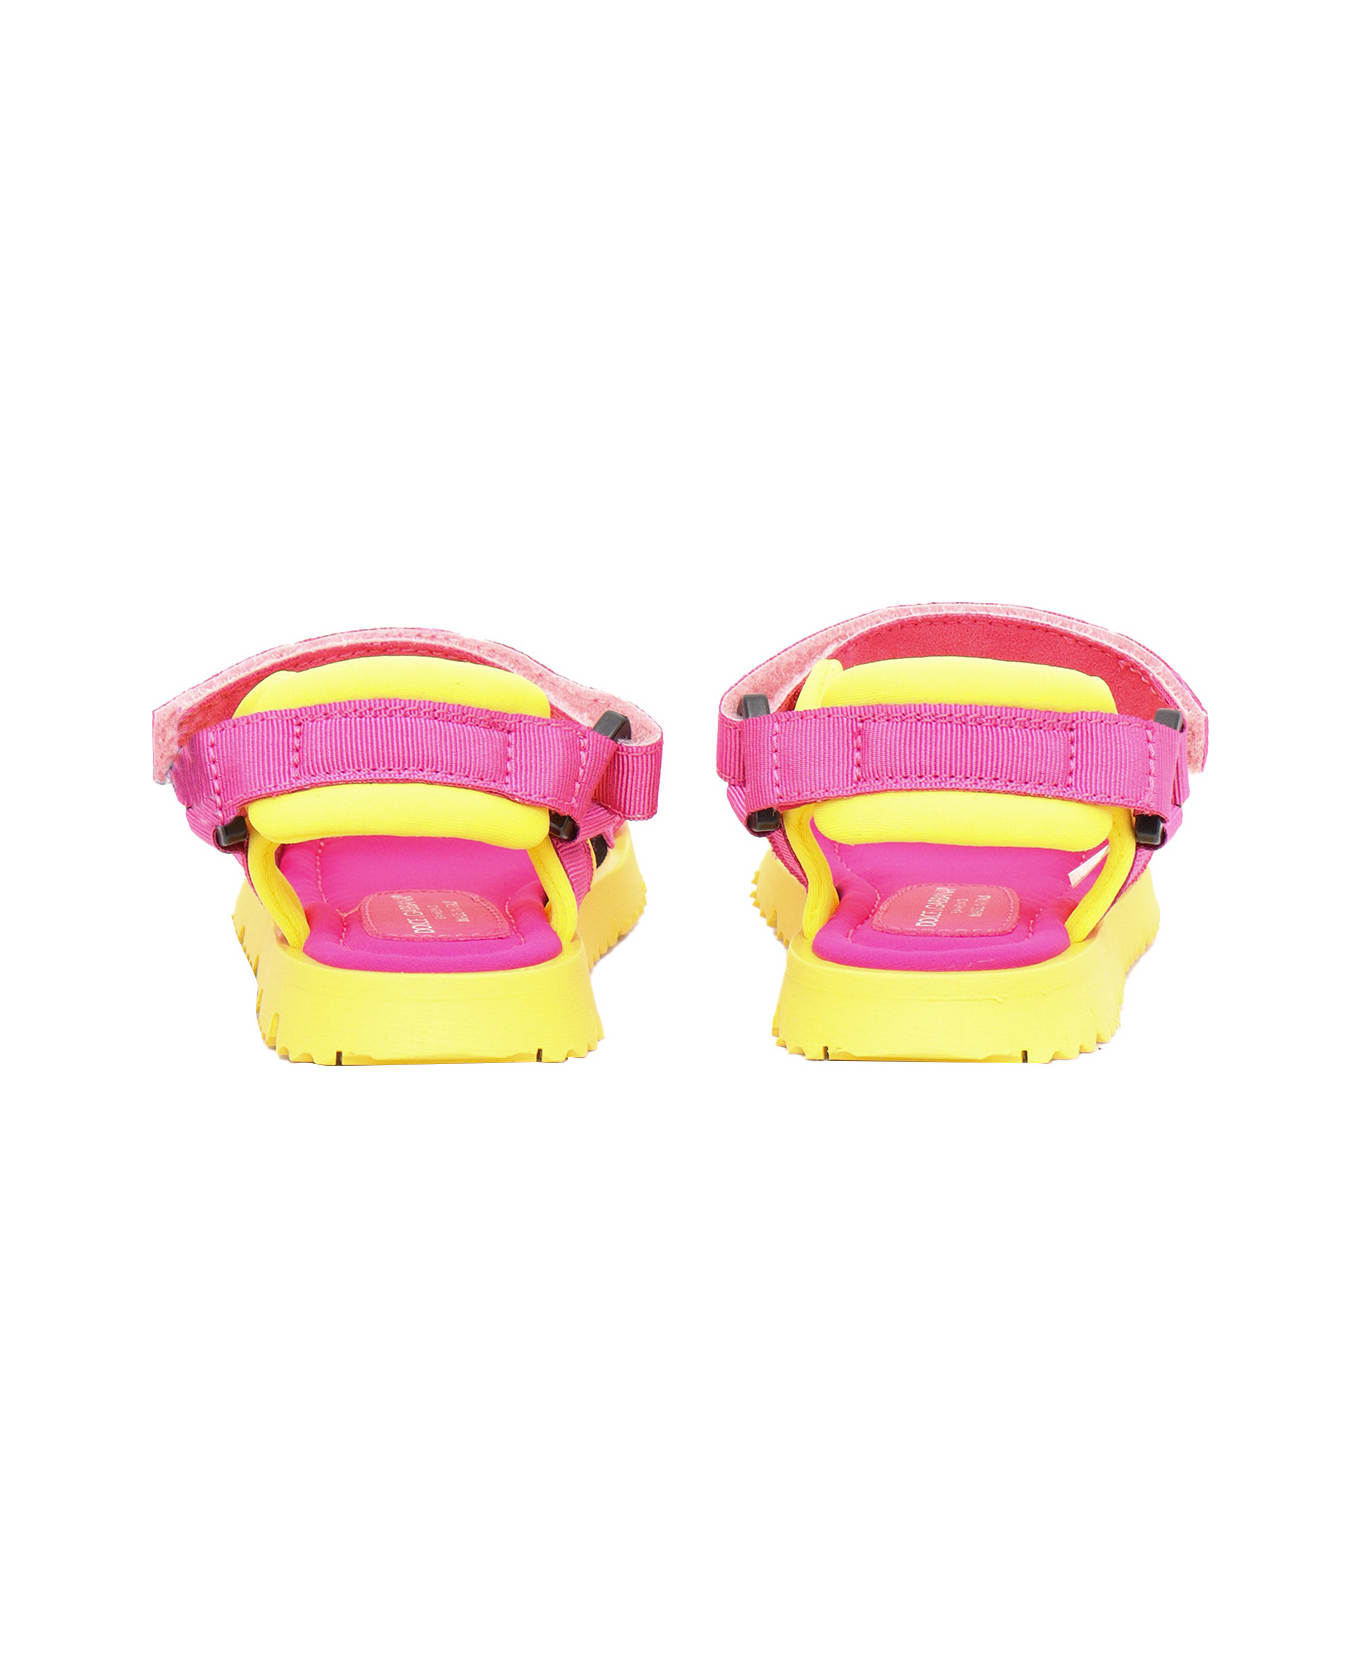 Dolce & Gabbana Pink And Yellow D&g Sandals - YELLOW